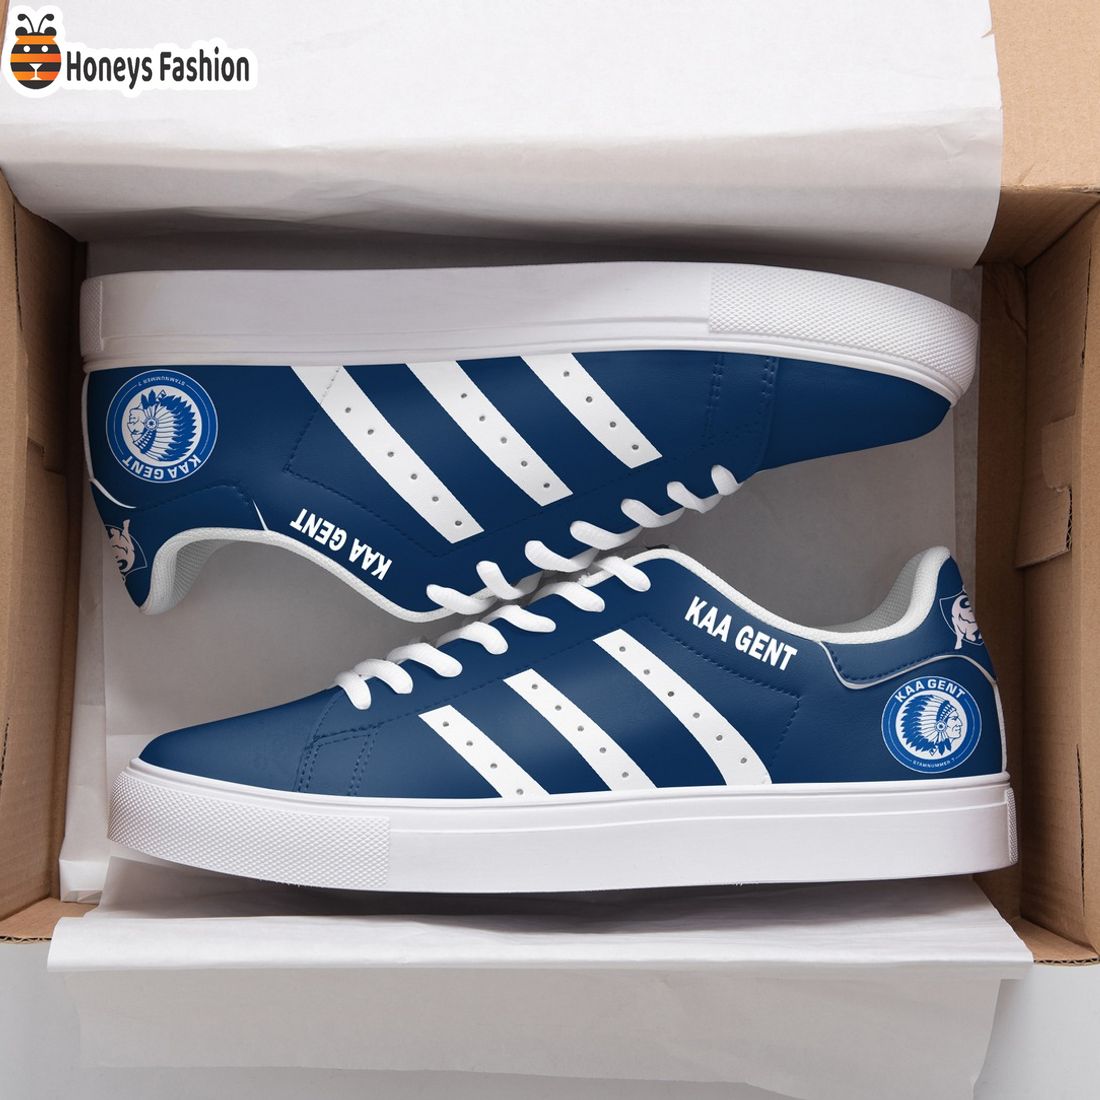 KAA Gent Blue Stan Smith Adidas Shoes